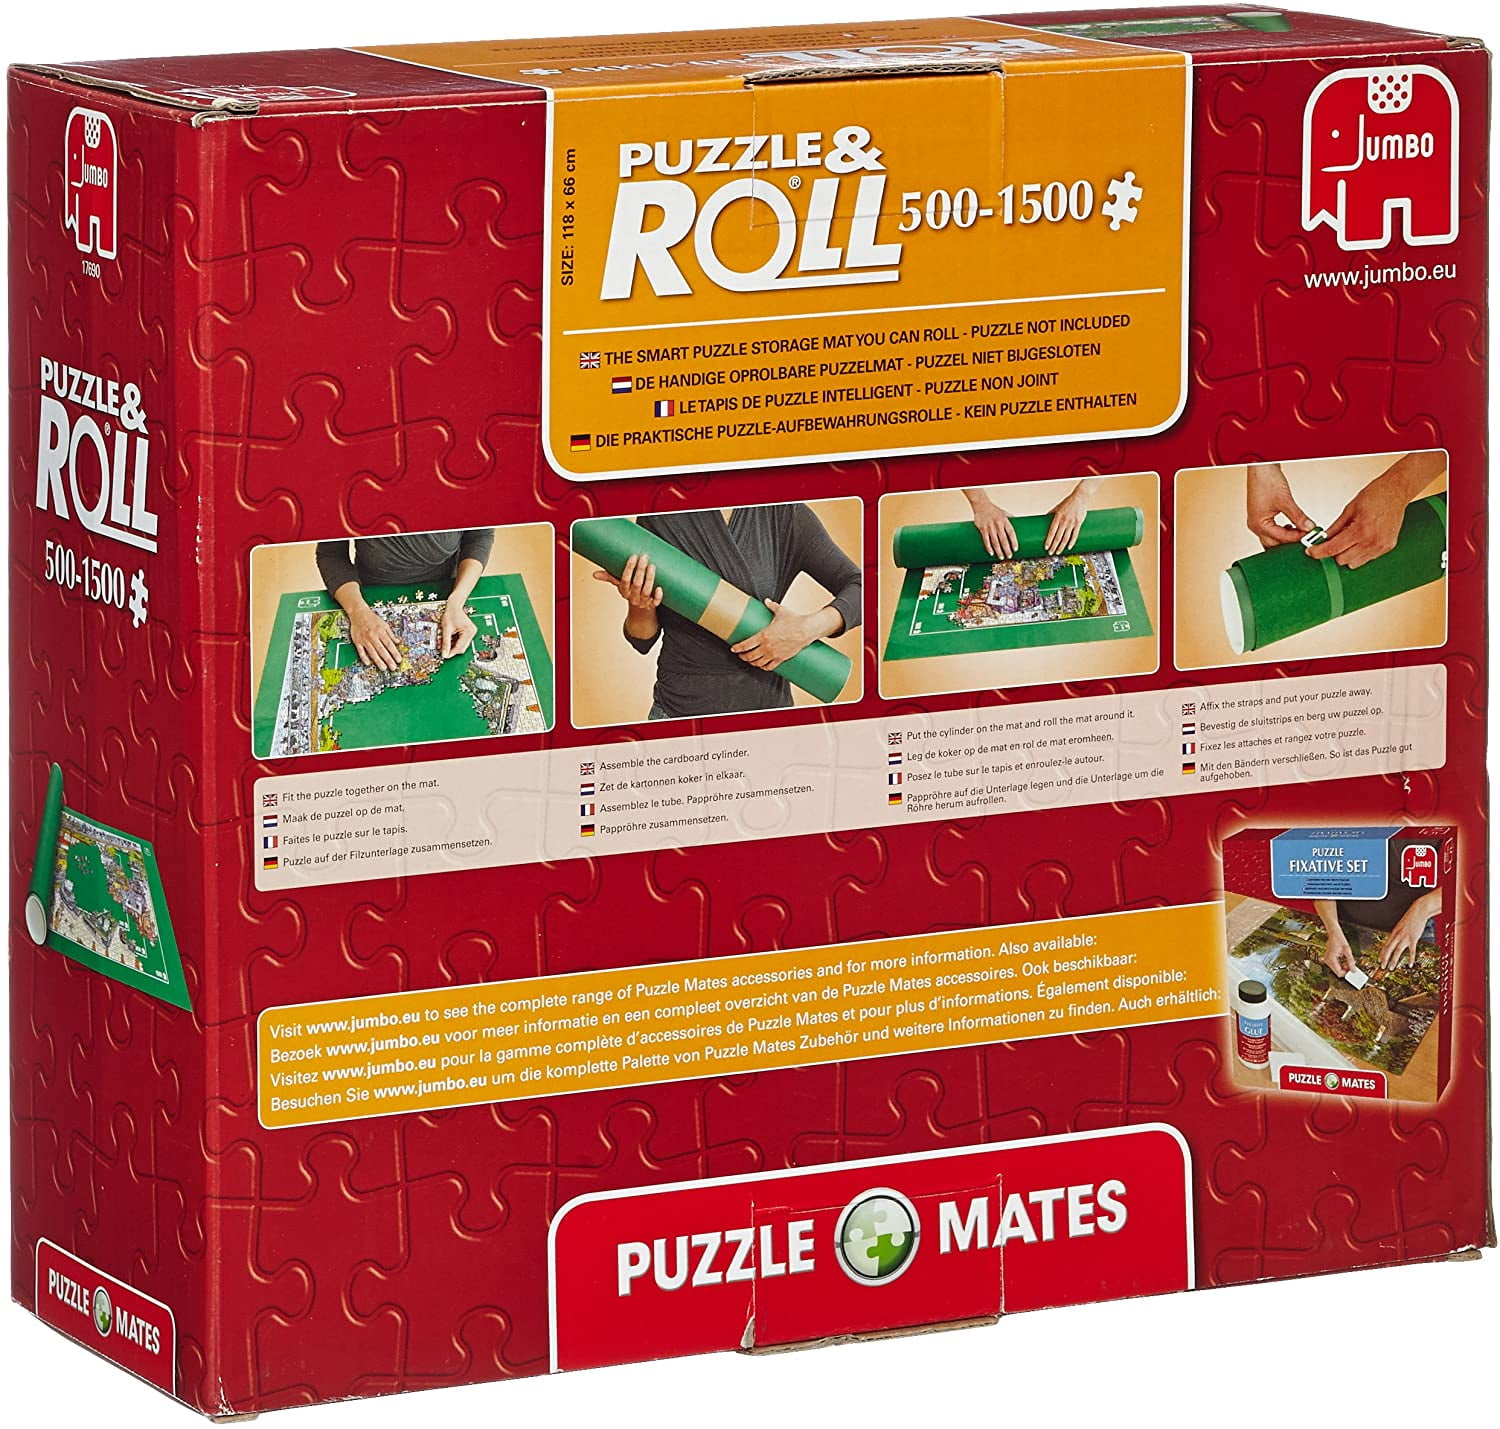 Jumbo Puzzle Mates Puzzle & Roll (1500 Pieces) 